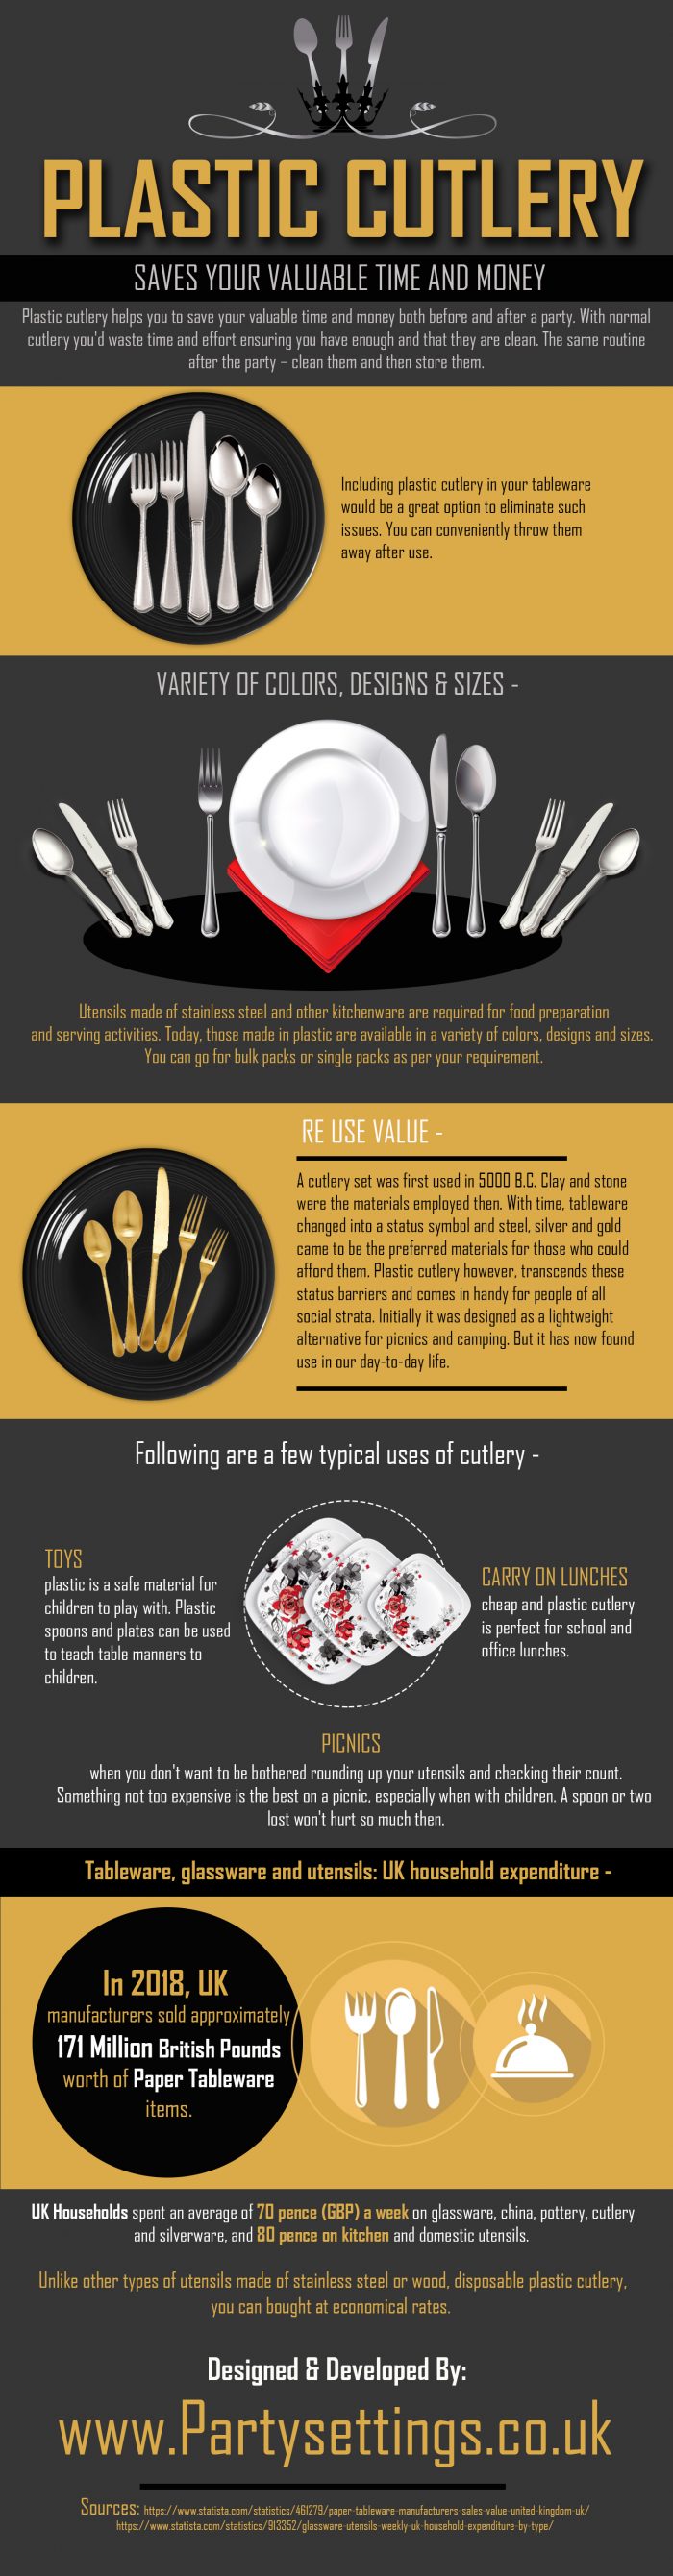 Plastic Cutlery – Saves Your Valuable Time and Money